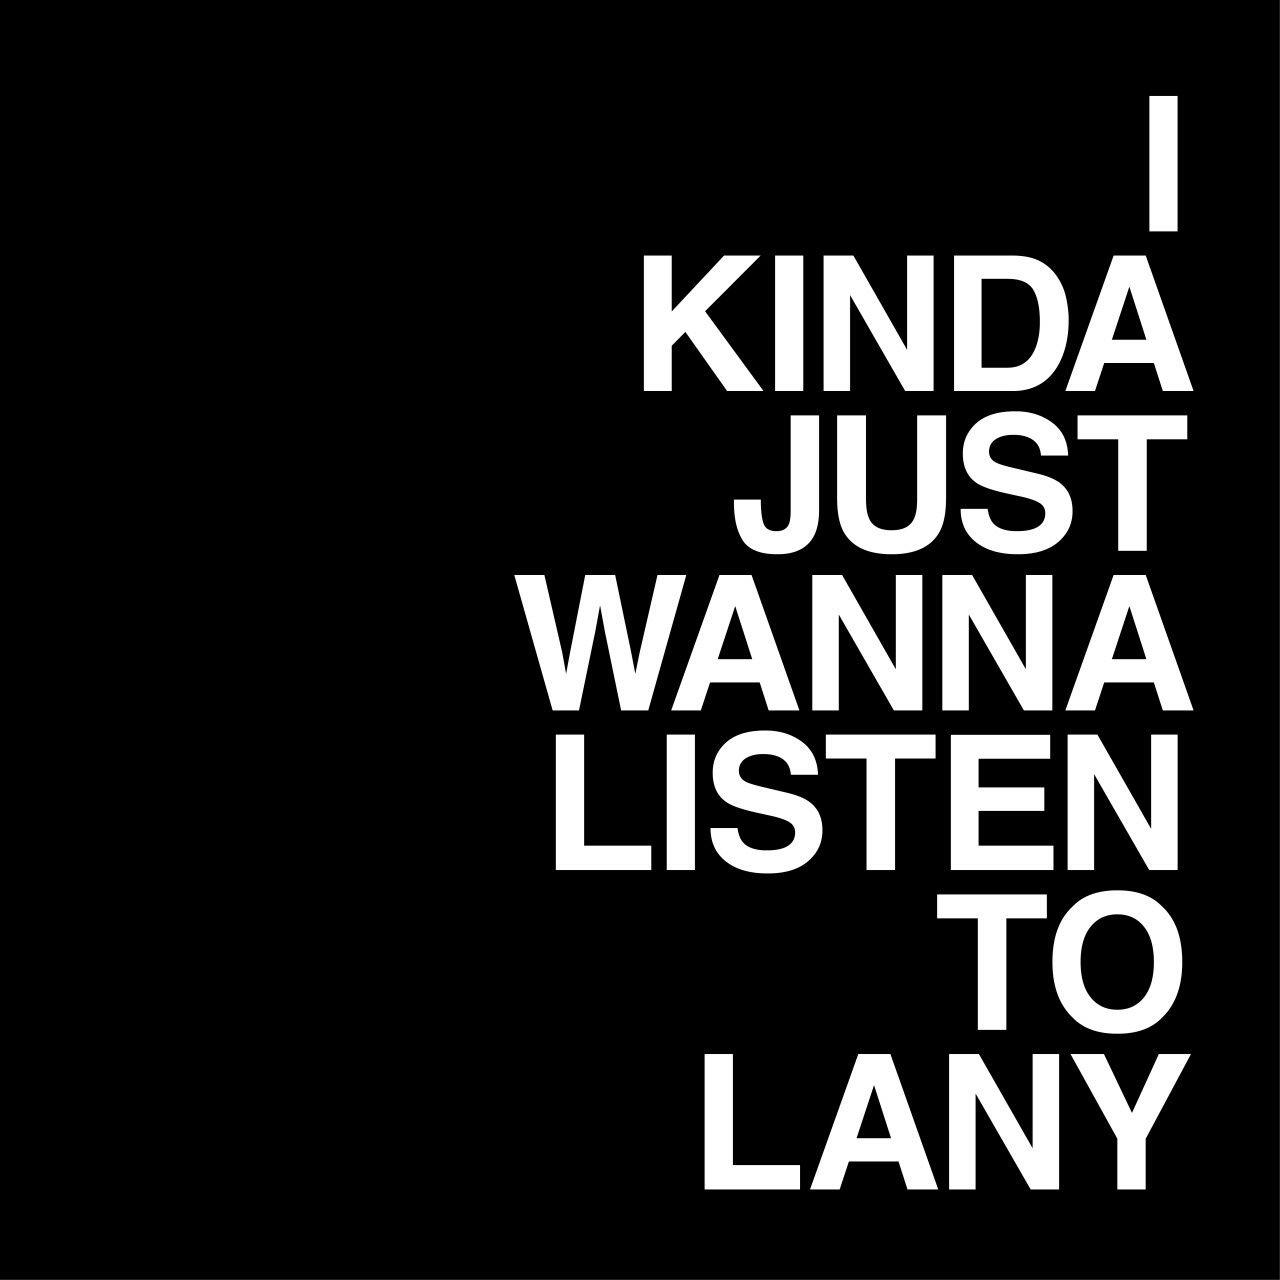 27 image about LANY